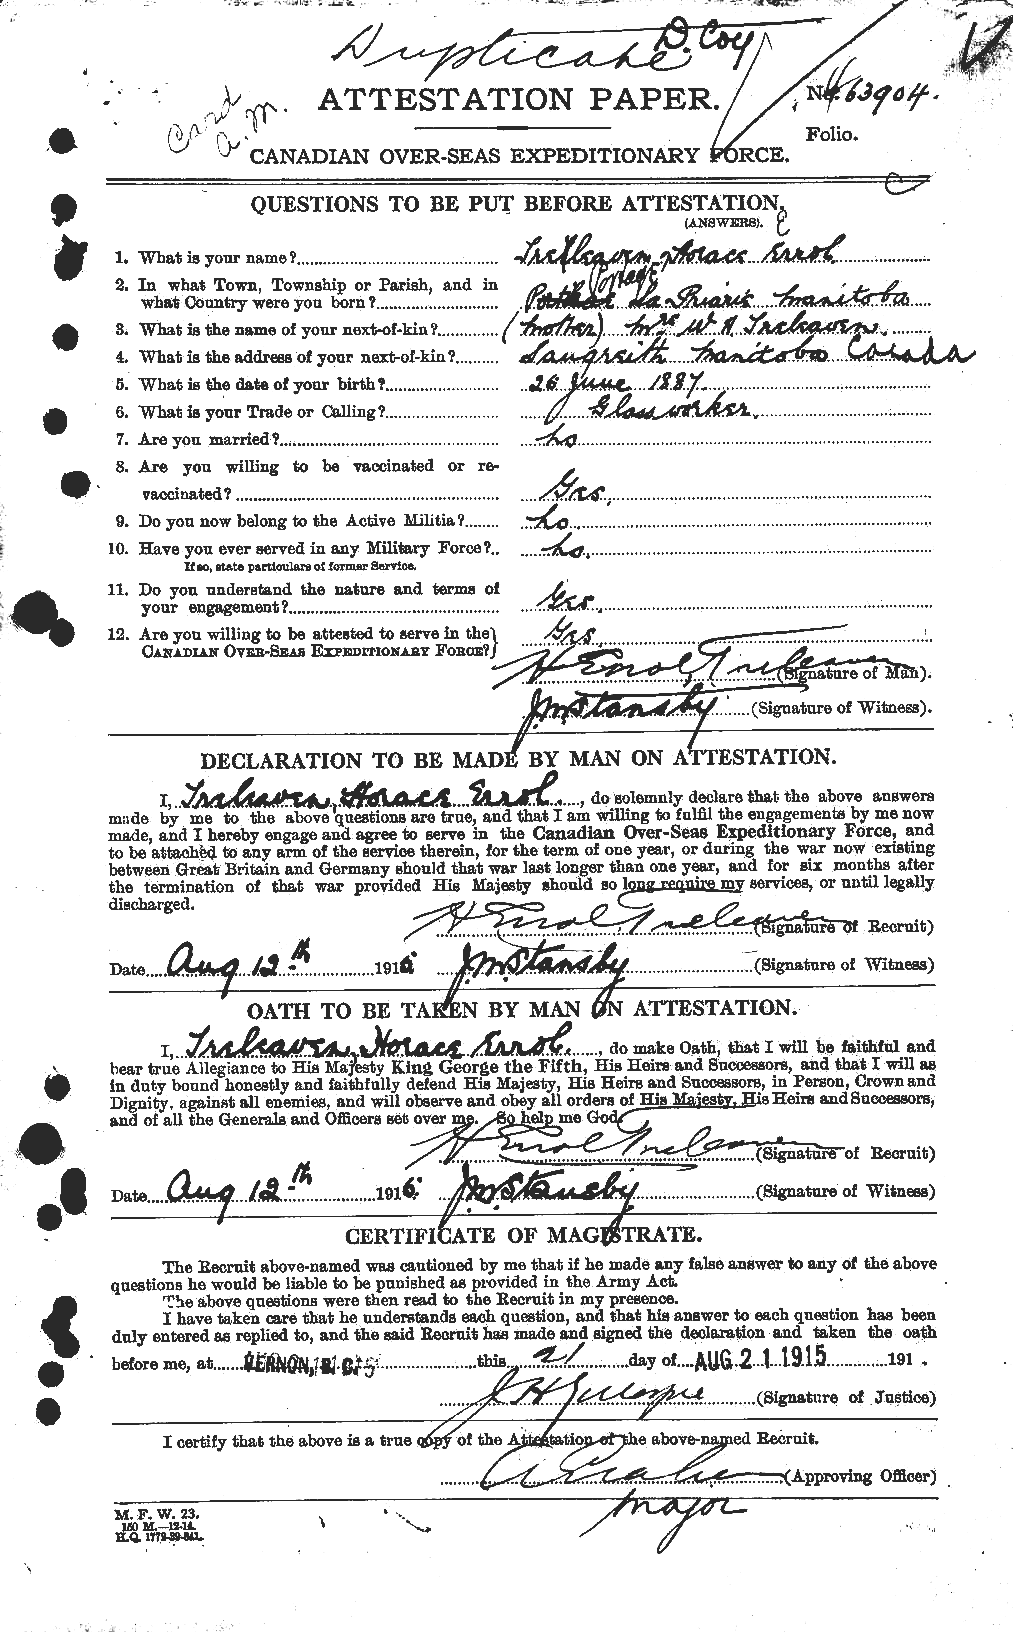 Personnel Records of the First World War - CEF 637483a